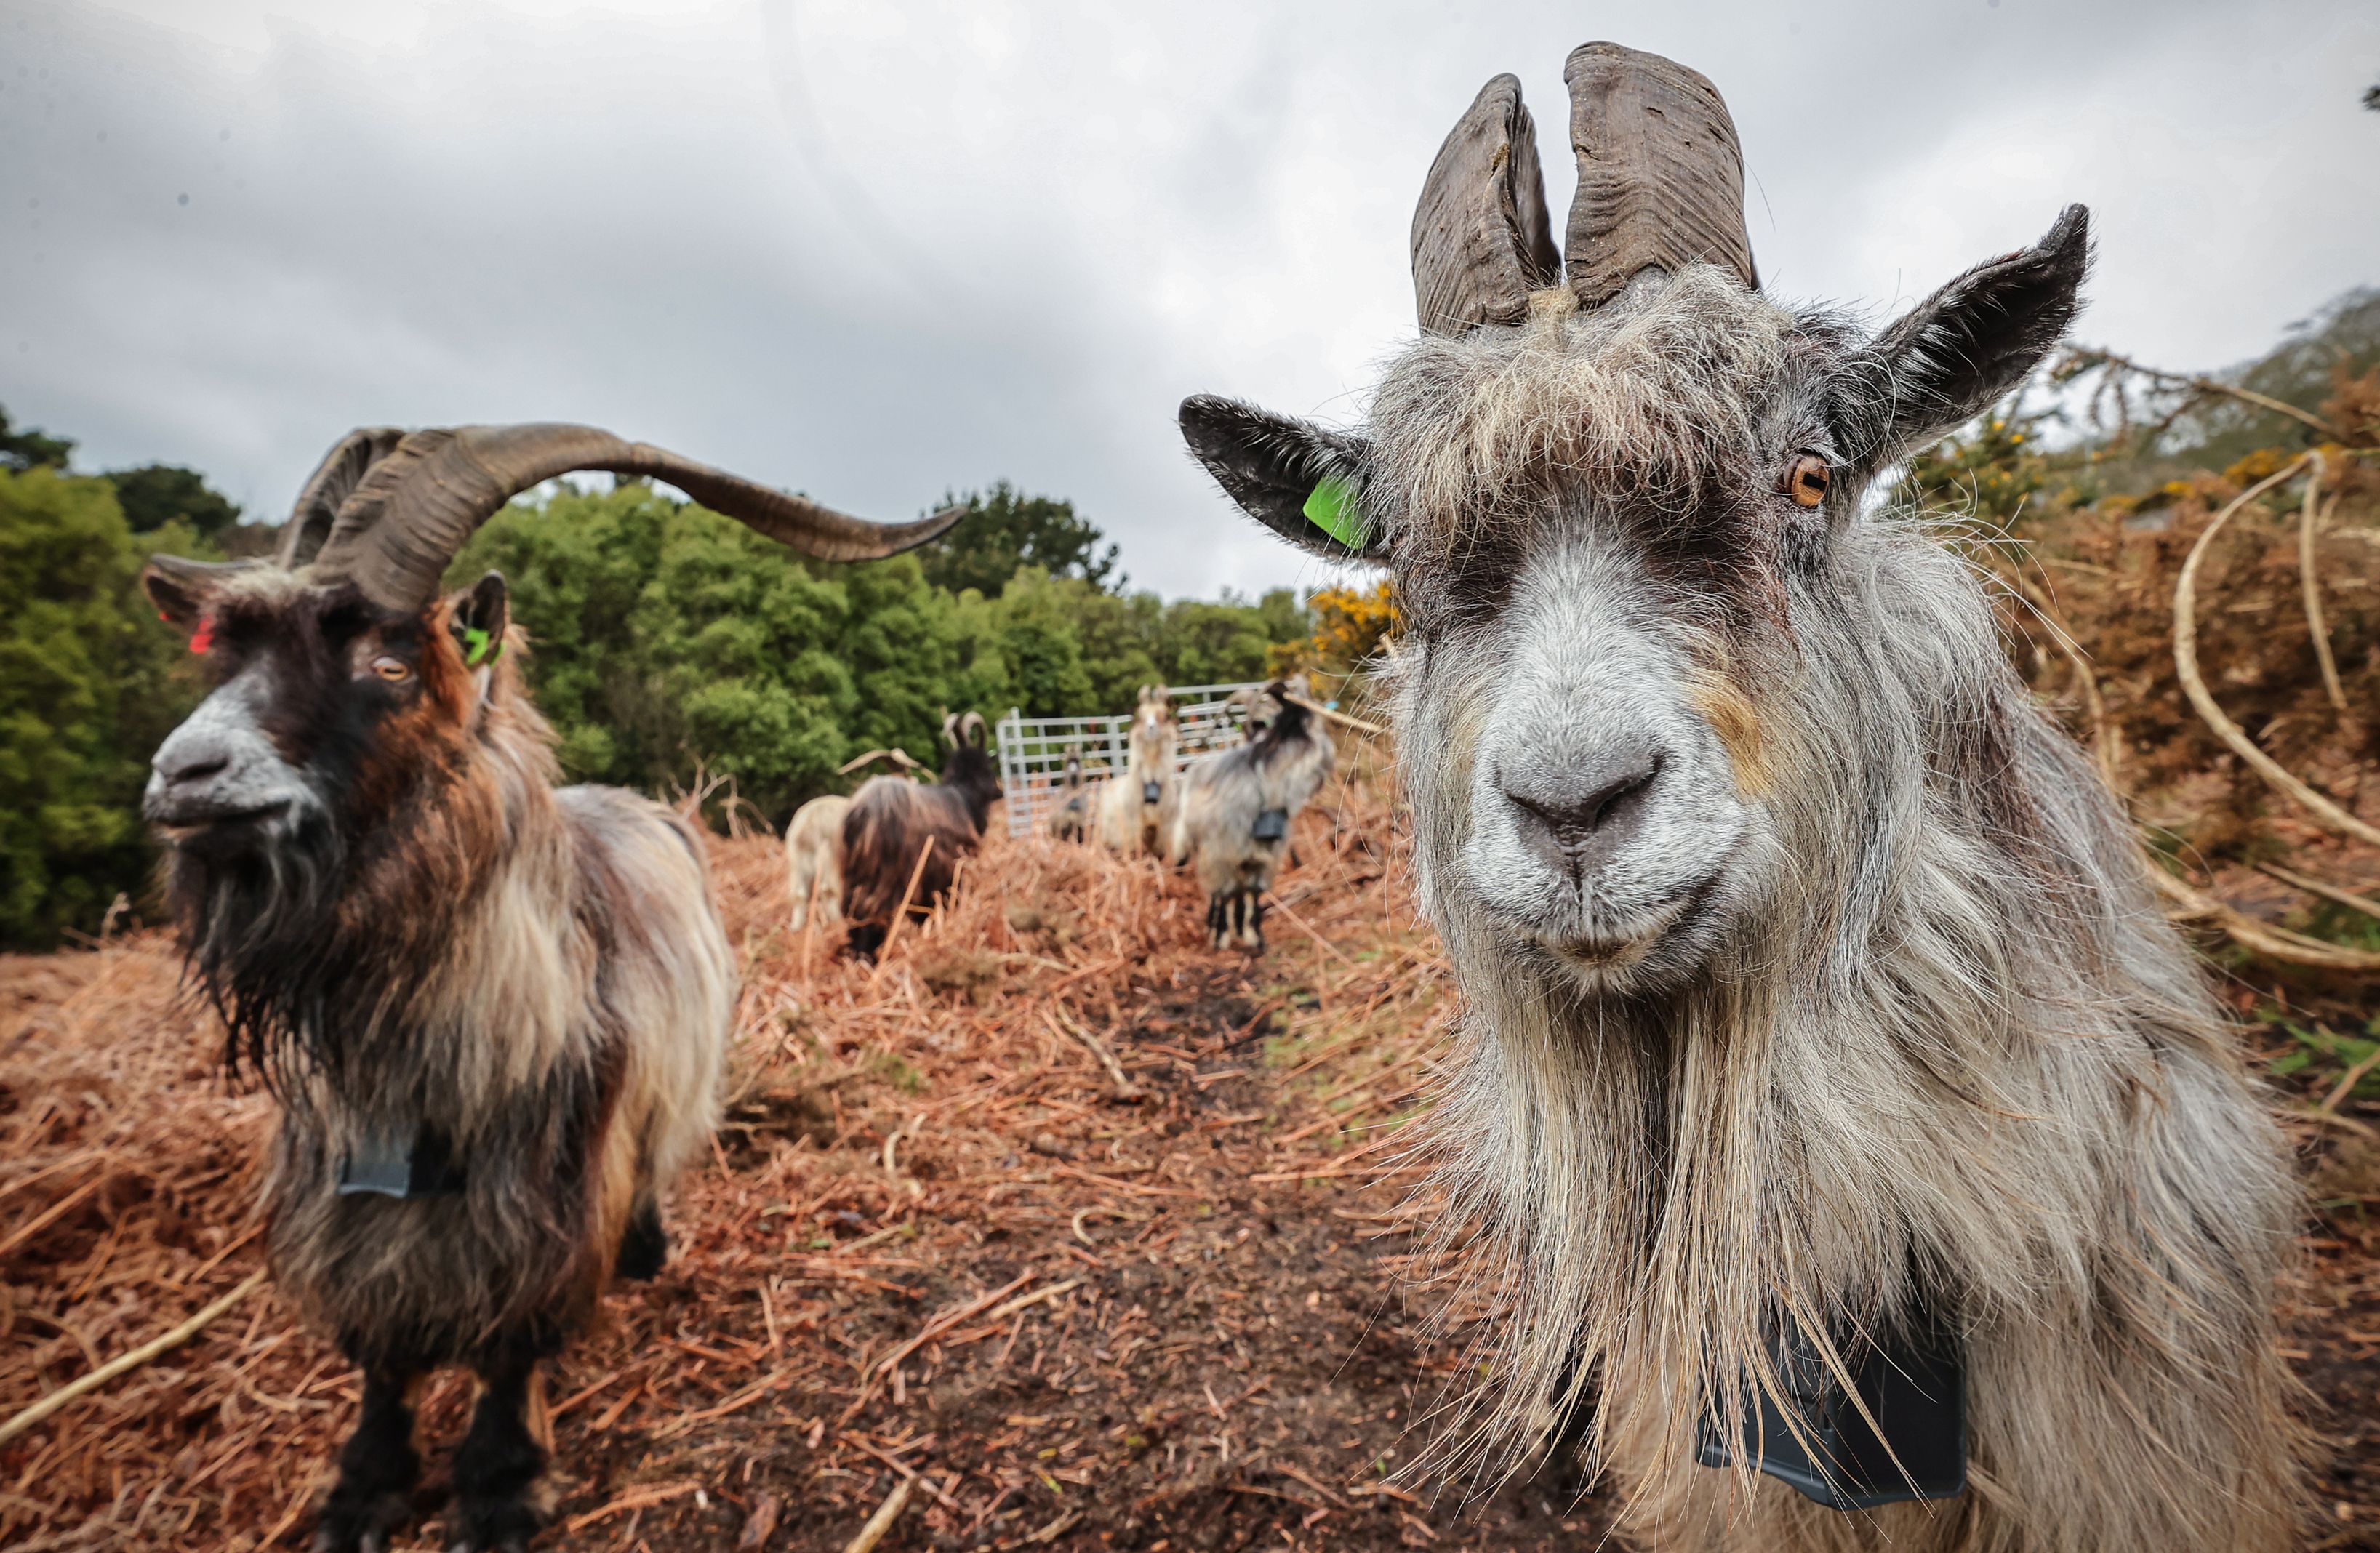 The Old Irish Goat is our living, breathing heritage – how could we let  them die out or be hunted for sport?